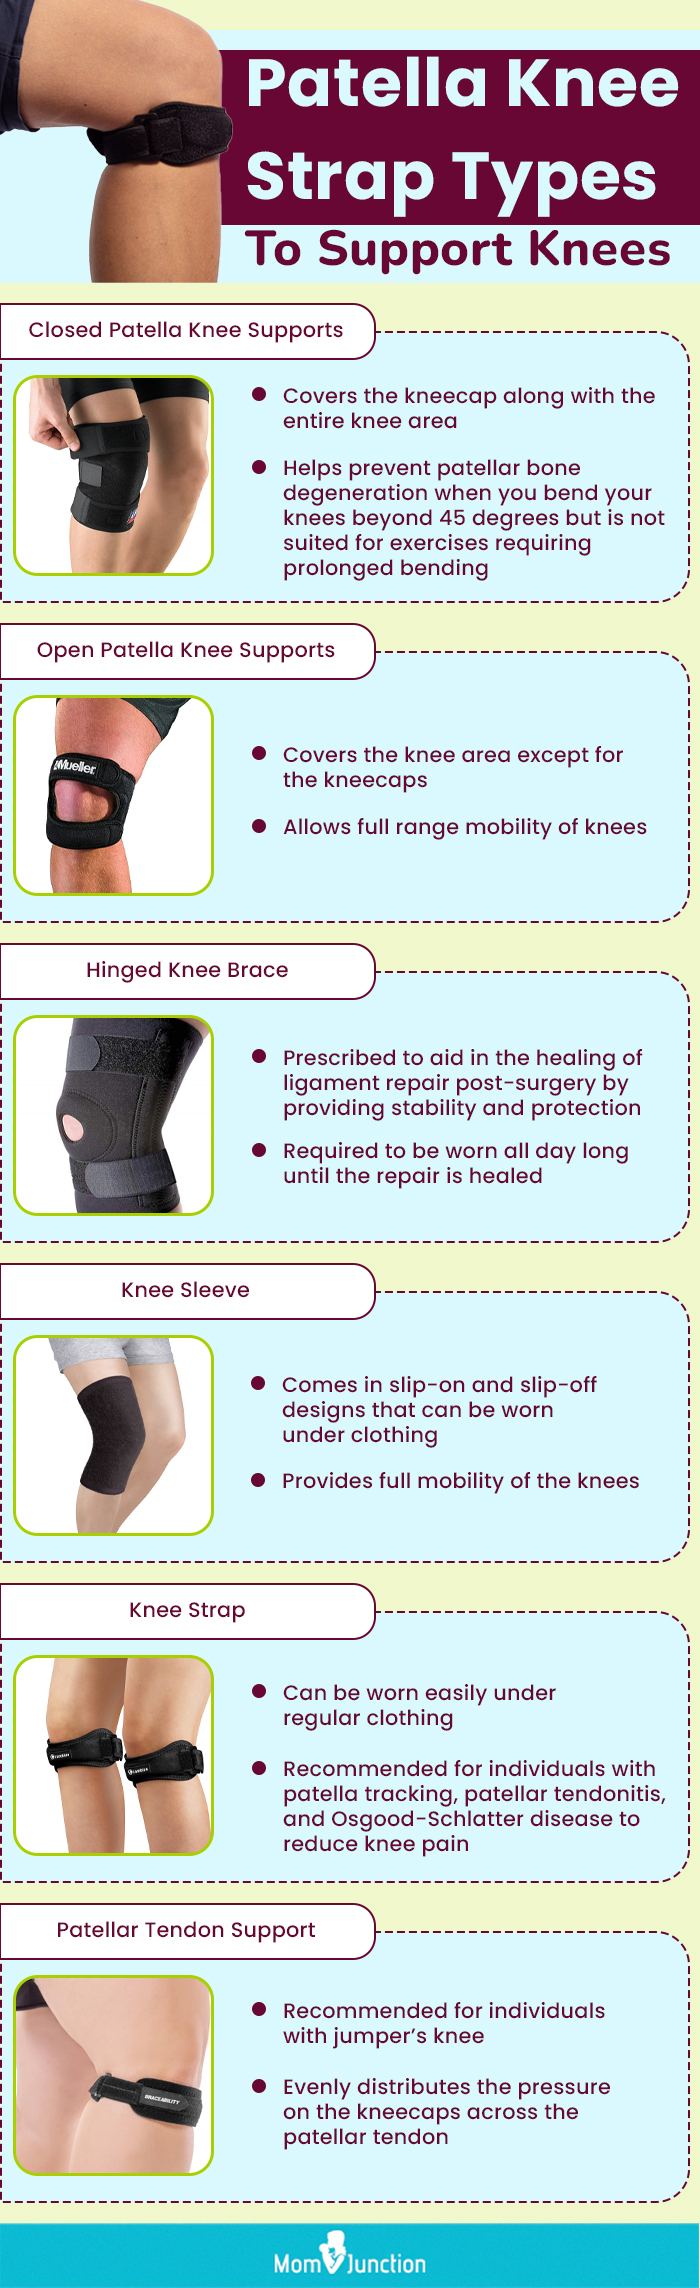 Patella Knee Strap Types To Support Knees (infographic)